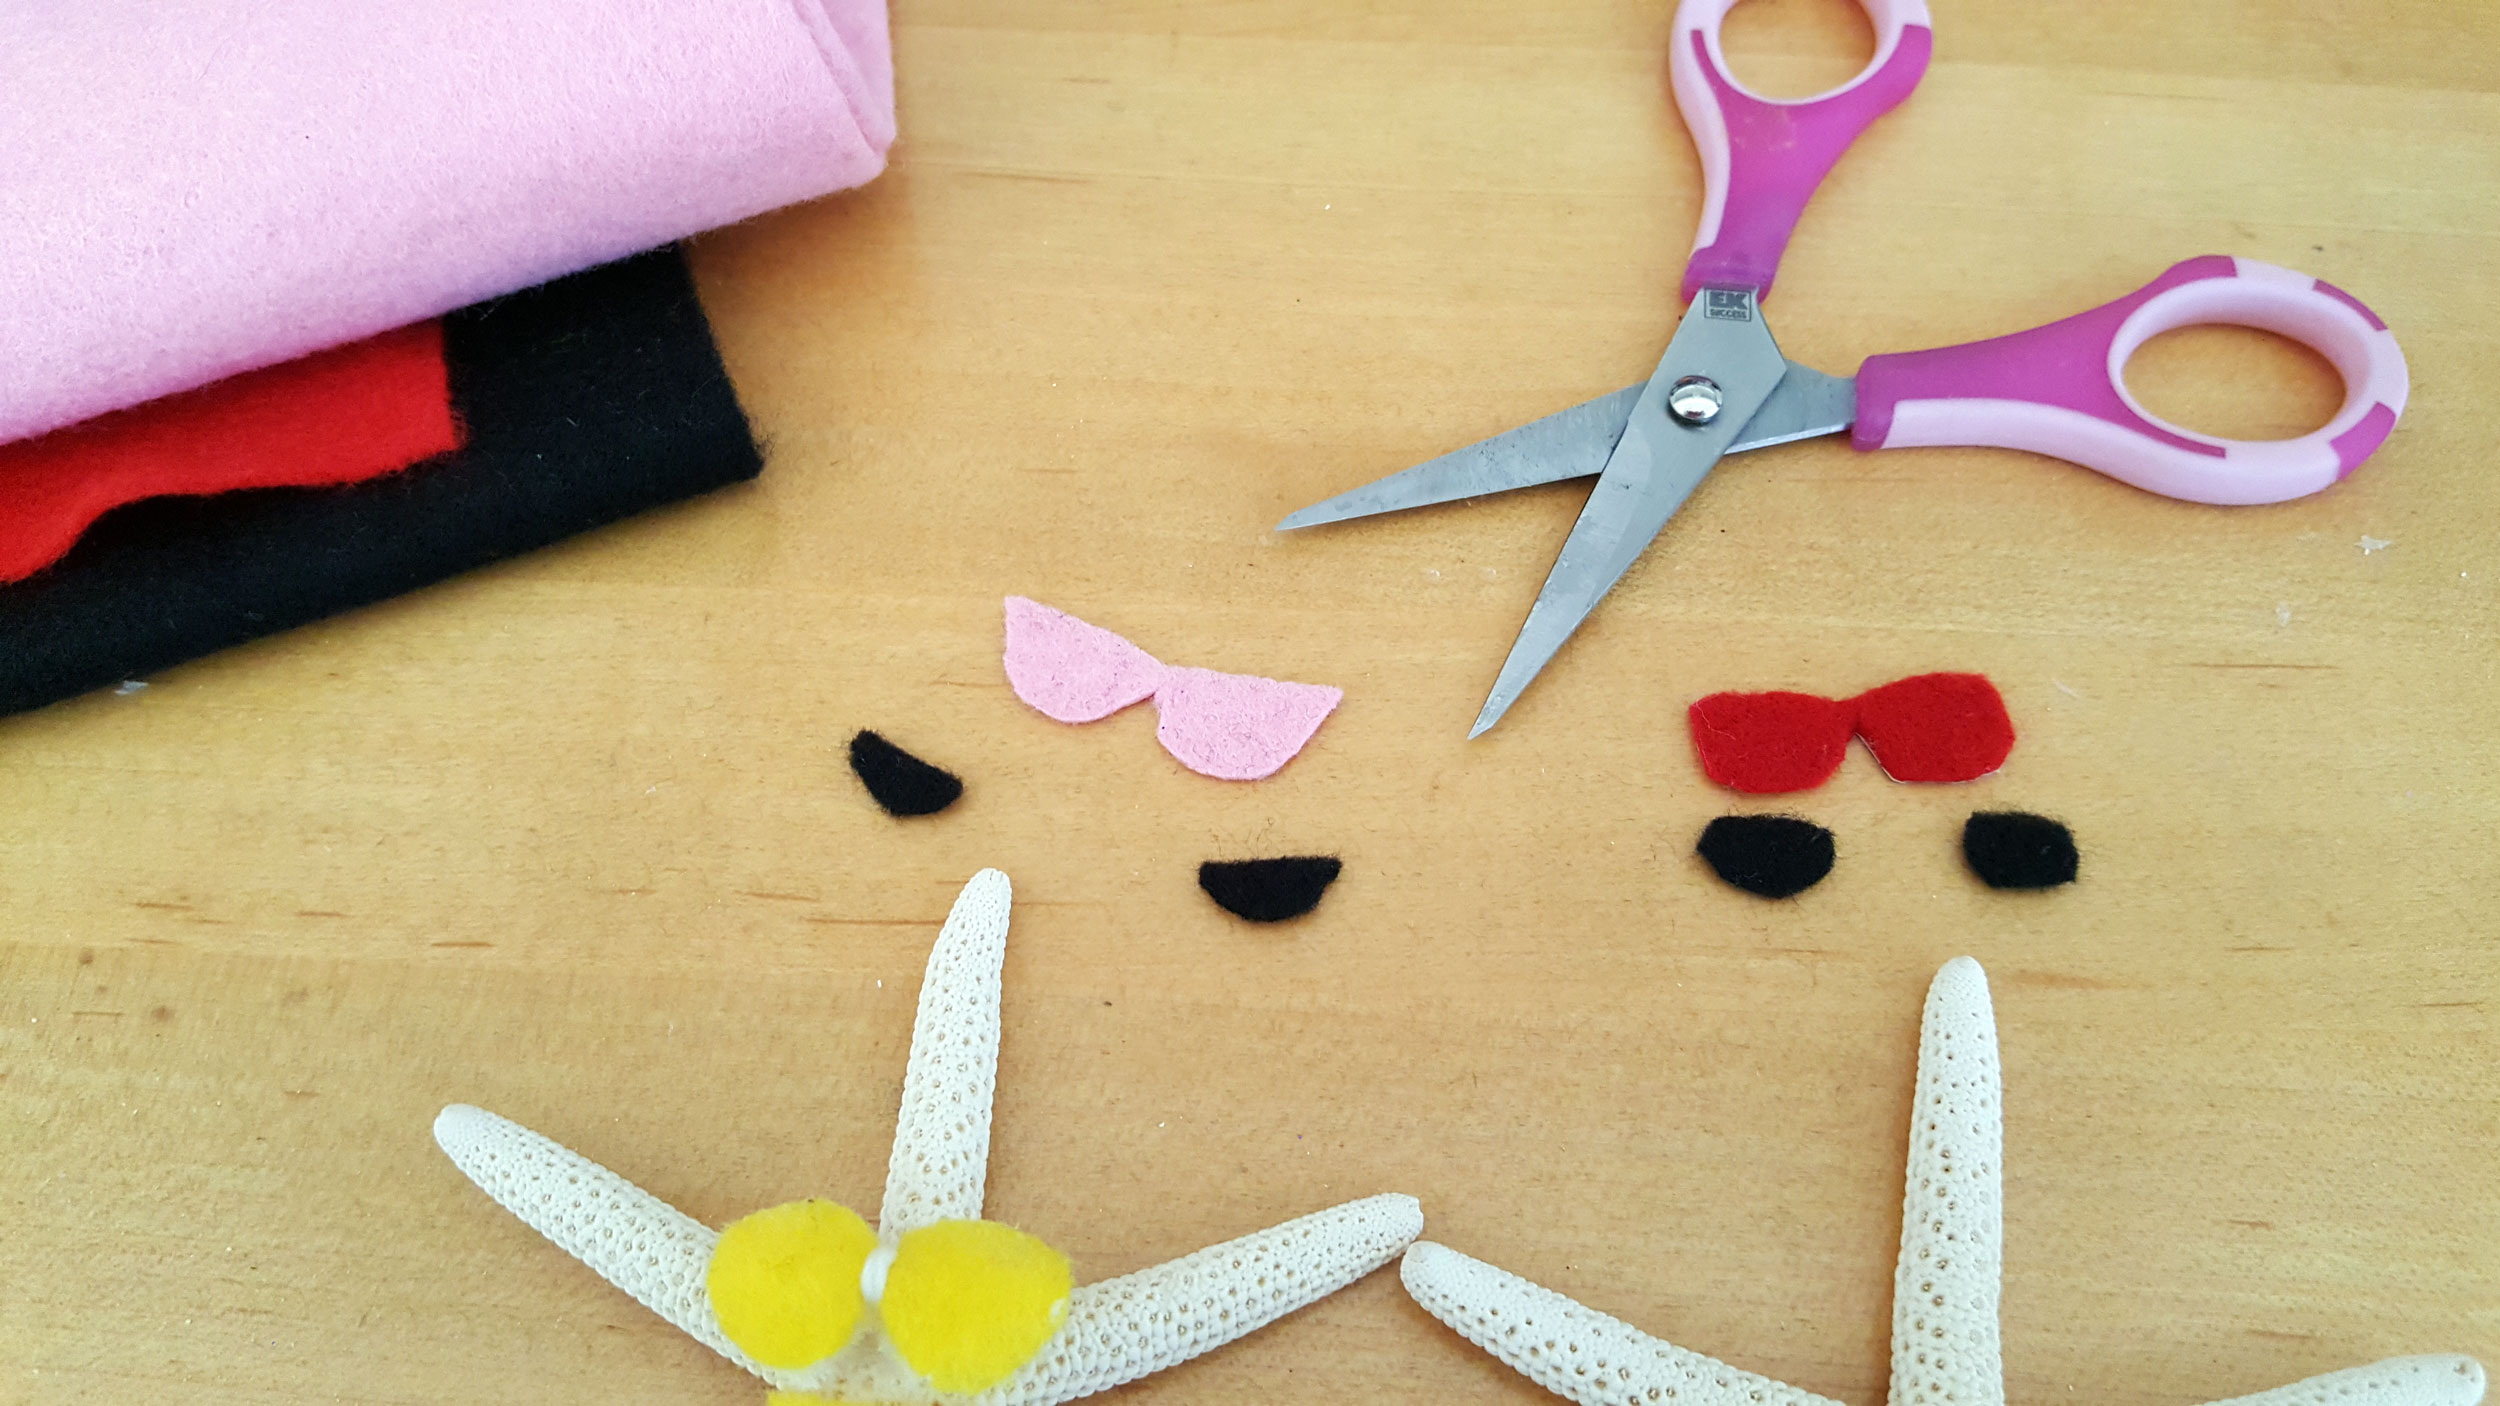 Cut-out felt in shape of sunglasses with sewing scissors. | OrnamentShop.com